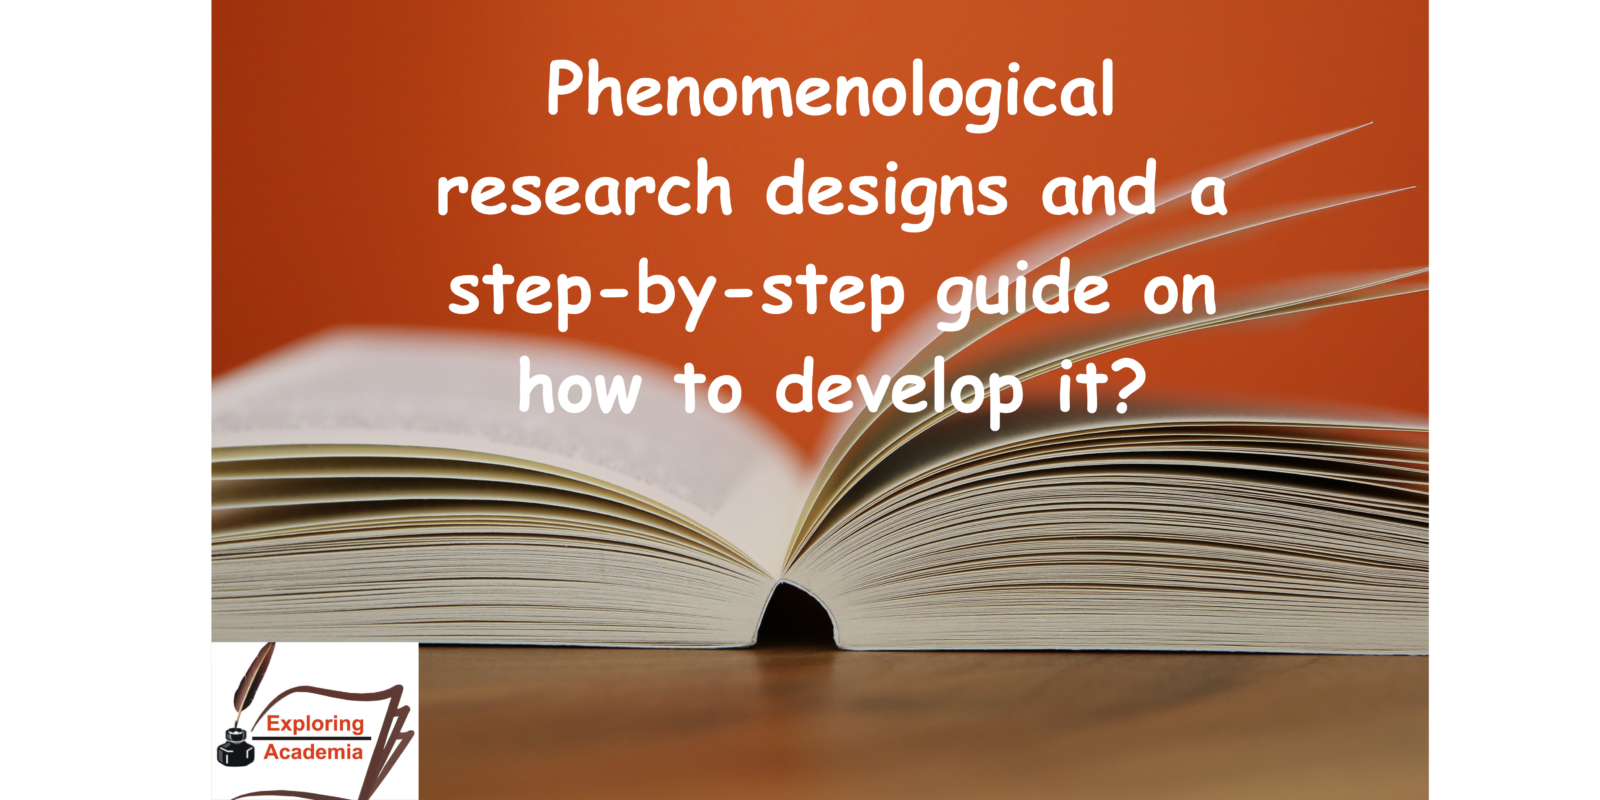 Phenomenological research designs and a step-by-step guide on how to develop it?